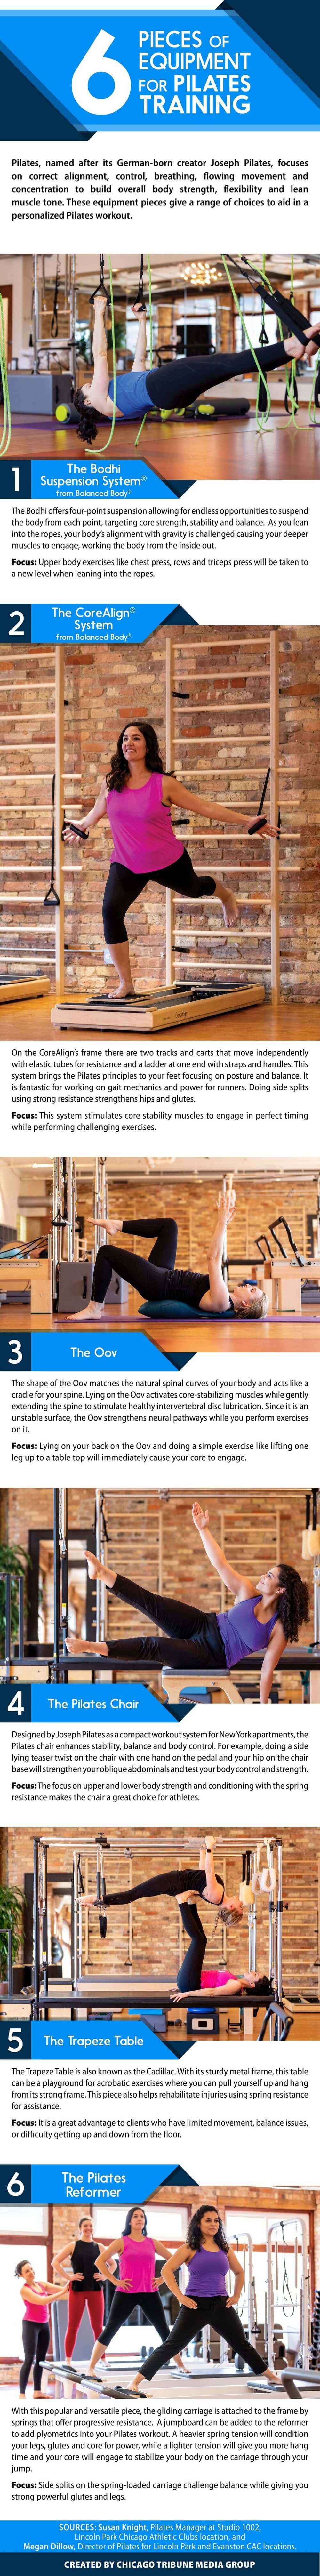 CAC_May2019_pilates infographic